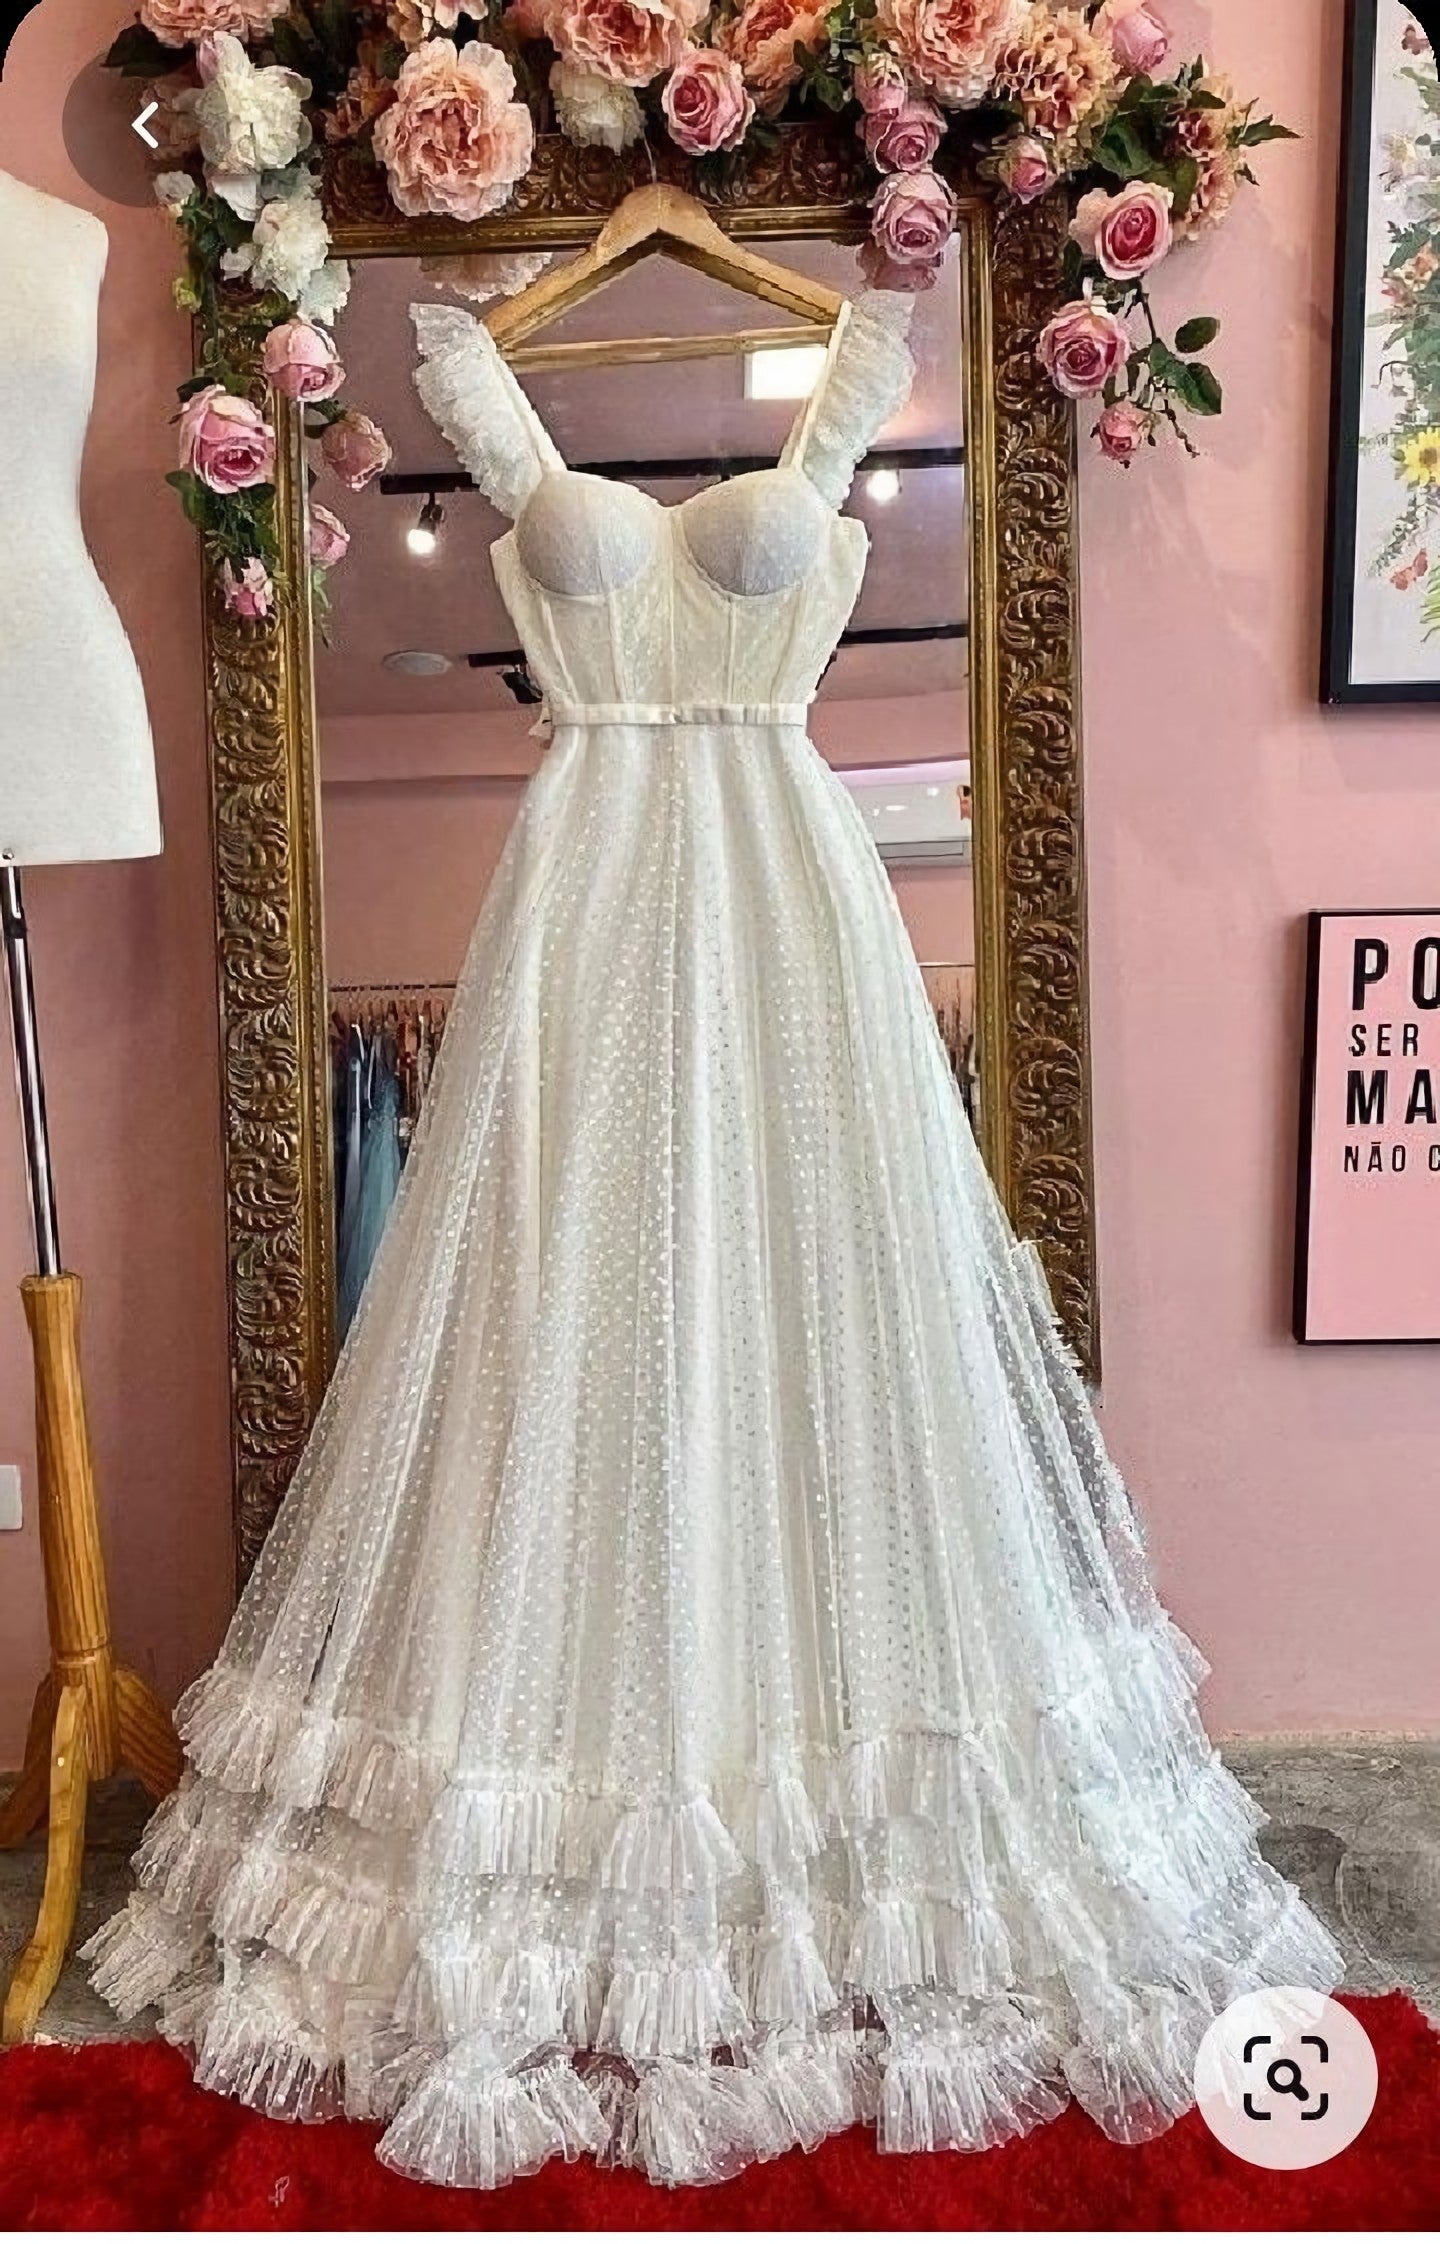 Party Dresses For 29 Year Olds, Princess Ivory Lace Sweetheart A Line Long Prom Dresses